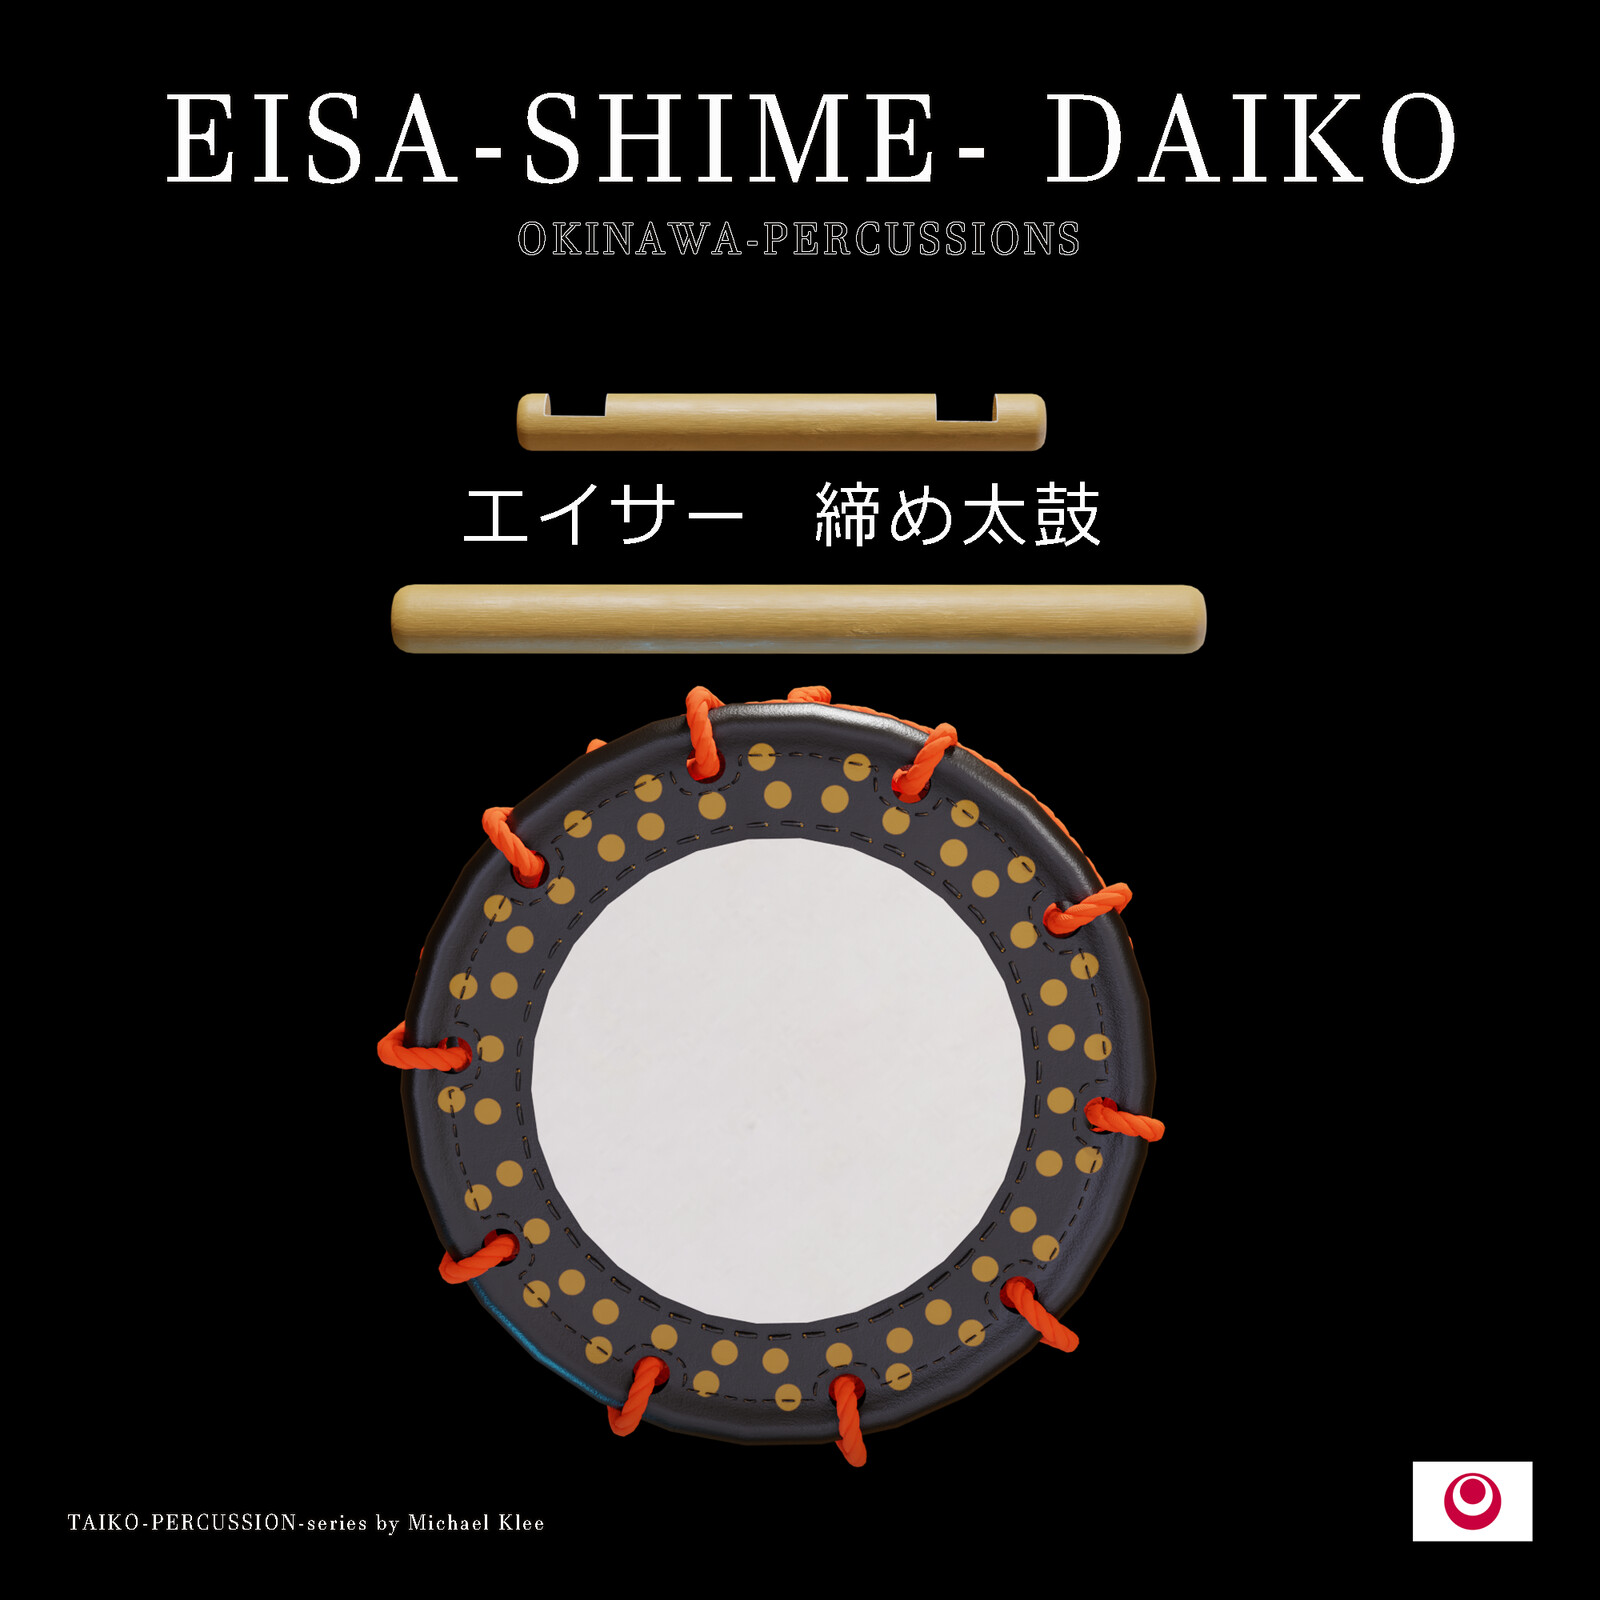 Eisa_shime_daiko_エイサー _締め太鼓 Top